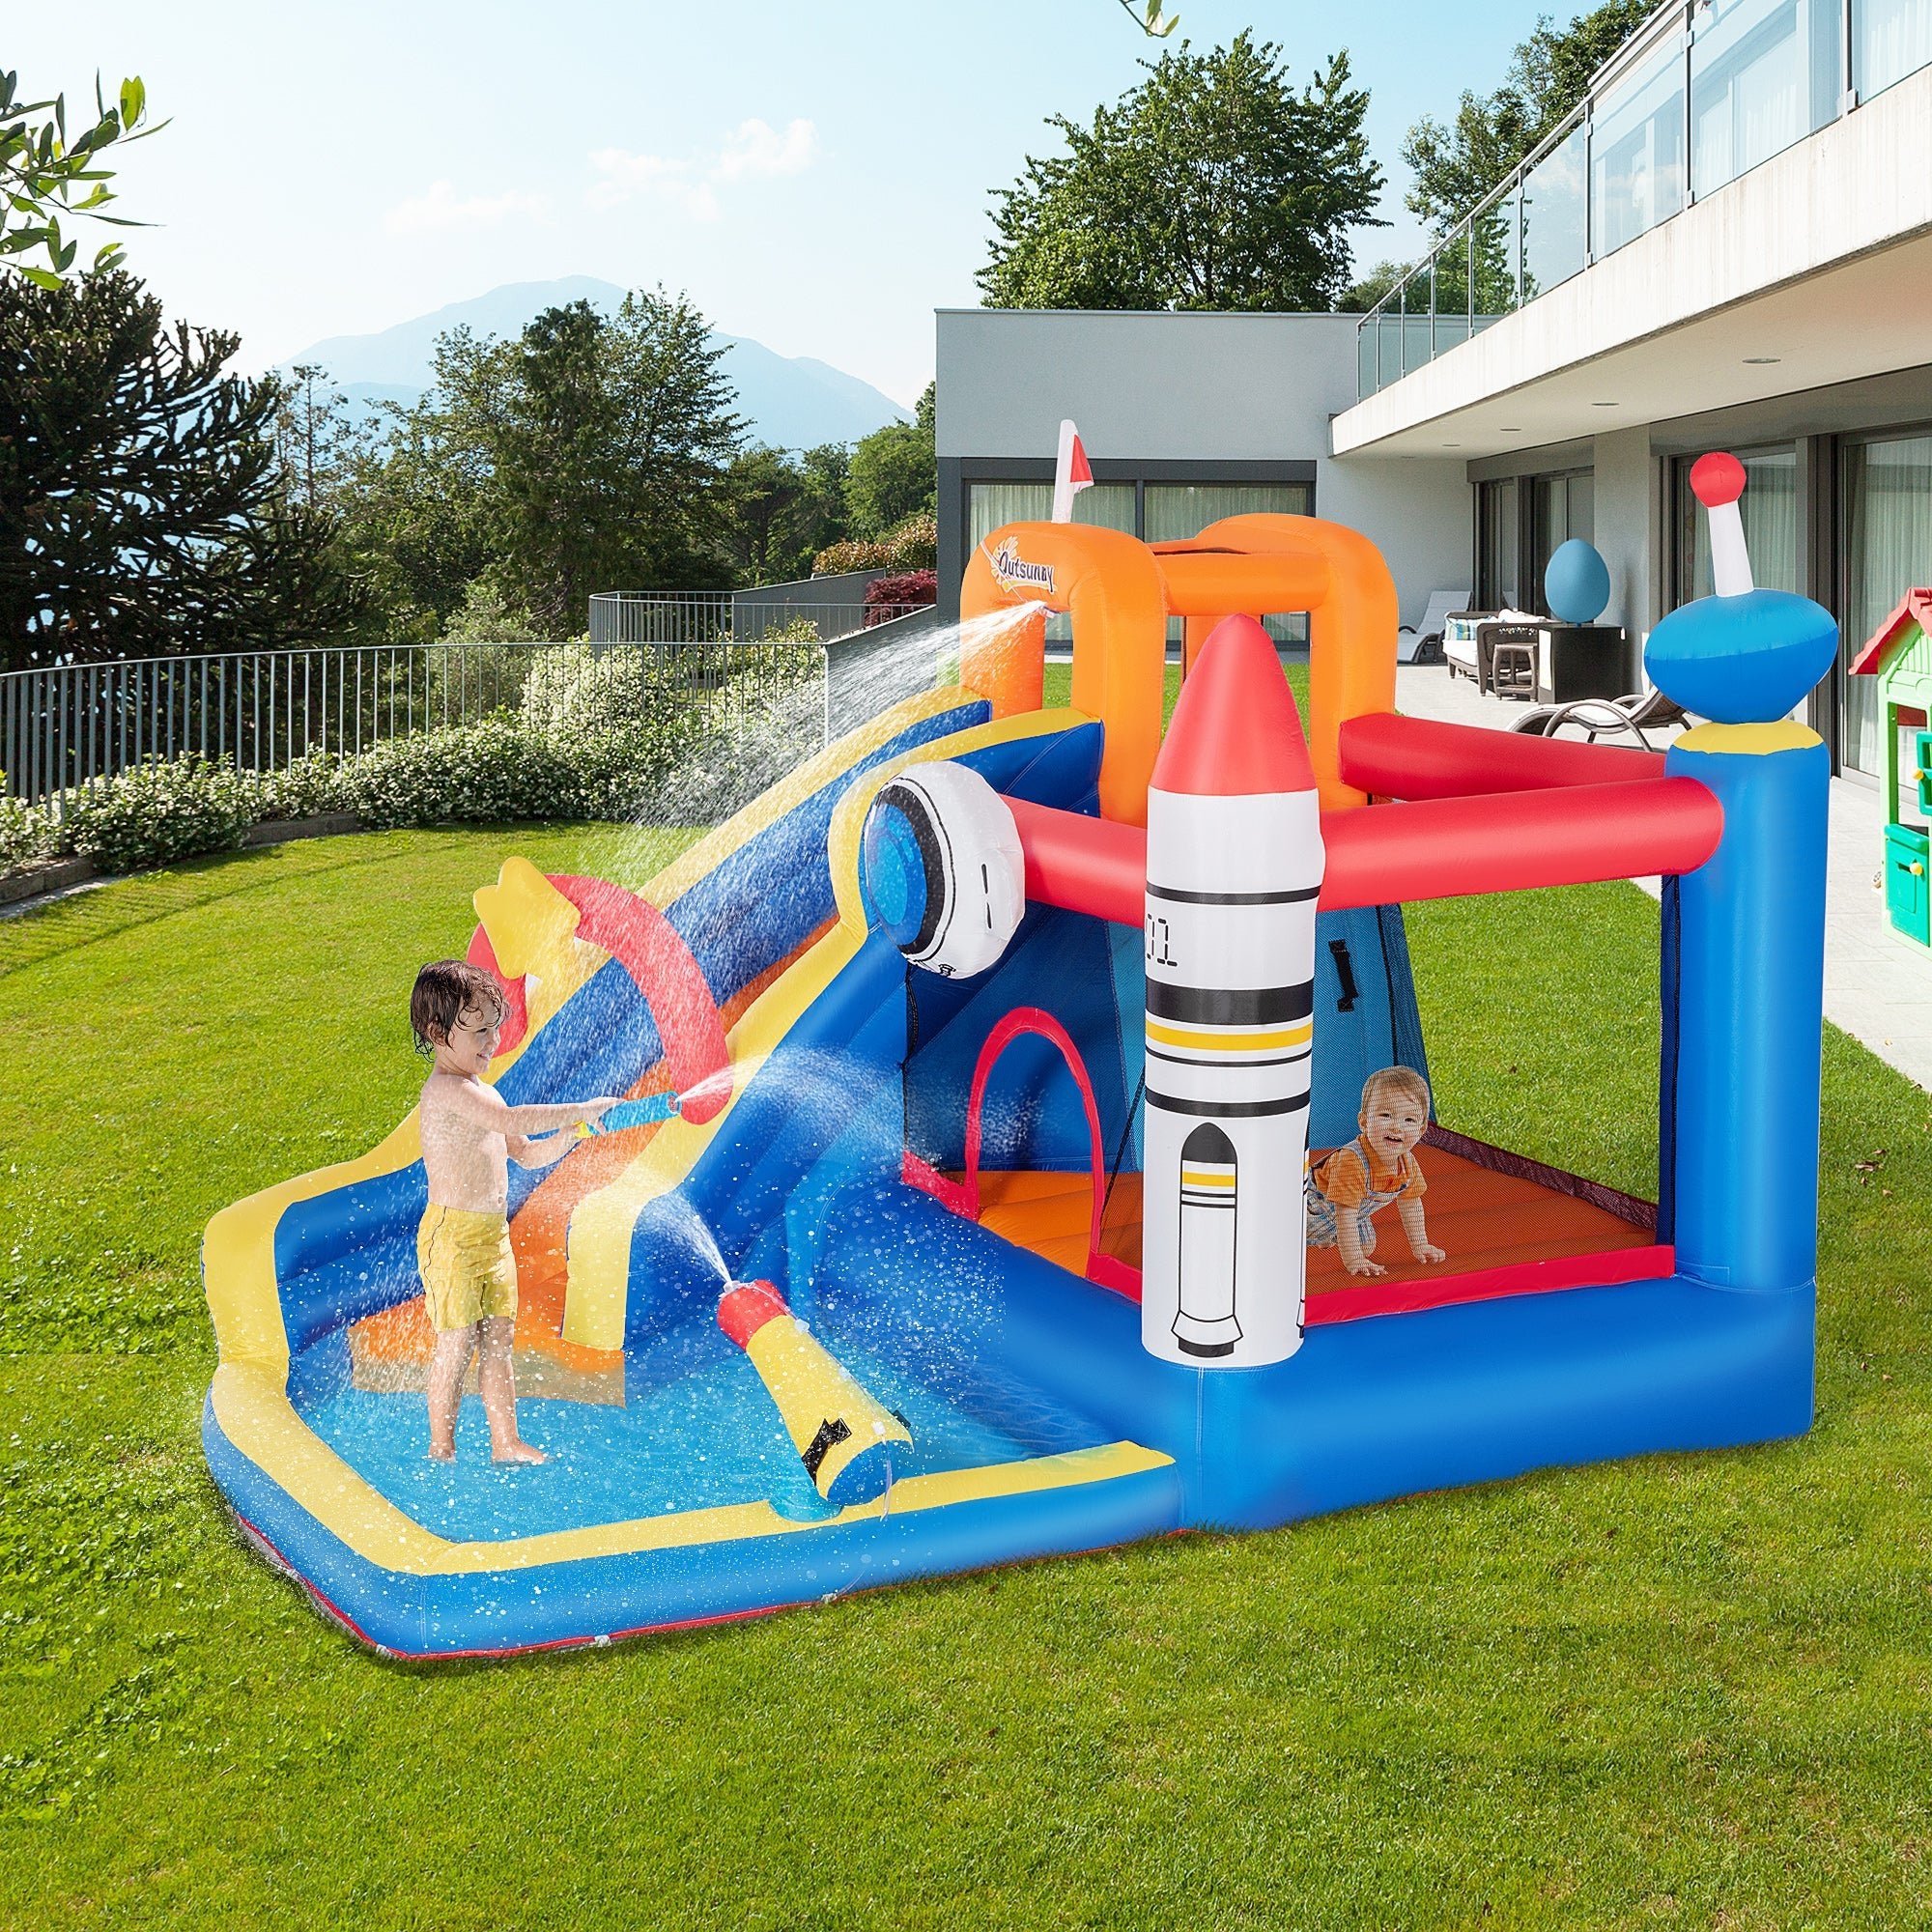 5-in-1 Inflatable Water Slide Kids Bounce House Space Theme Water Park Includes Slide Trampoline Pool Cannon Climbing Wall & 450W Air Blower